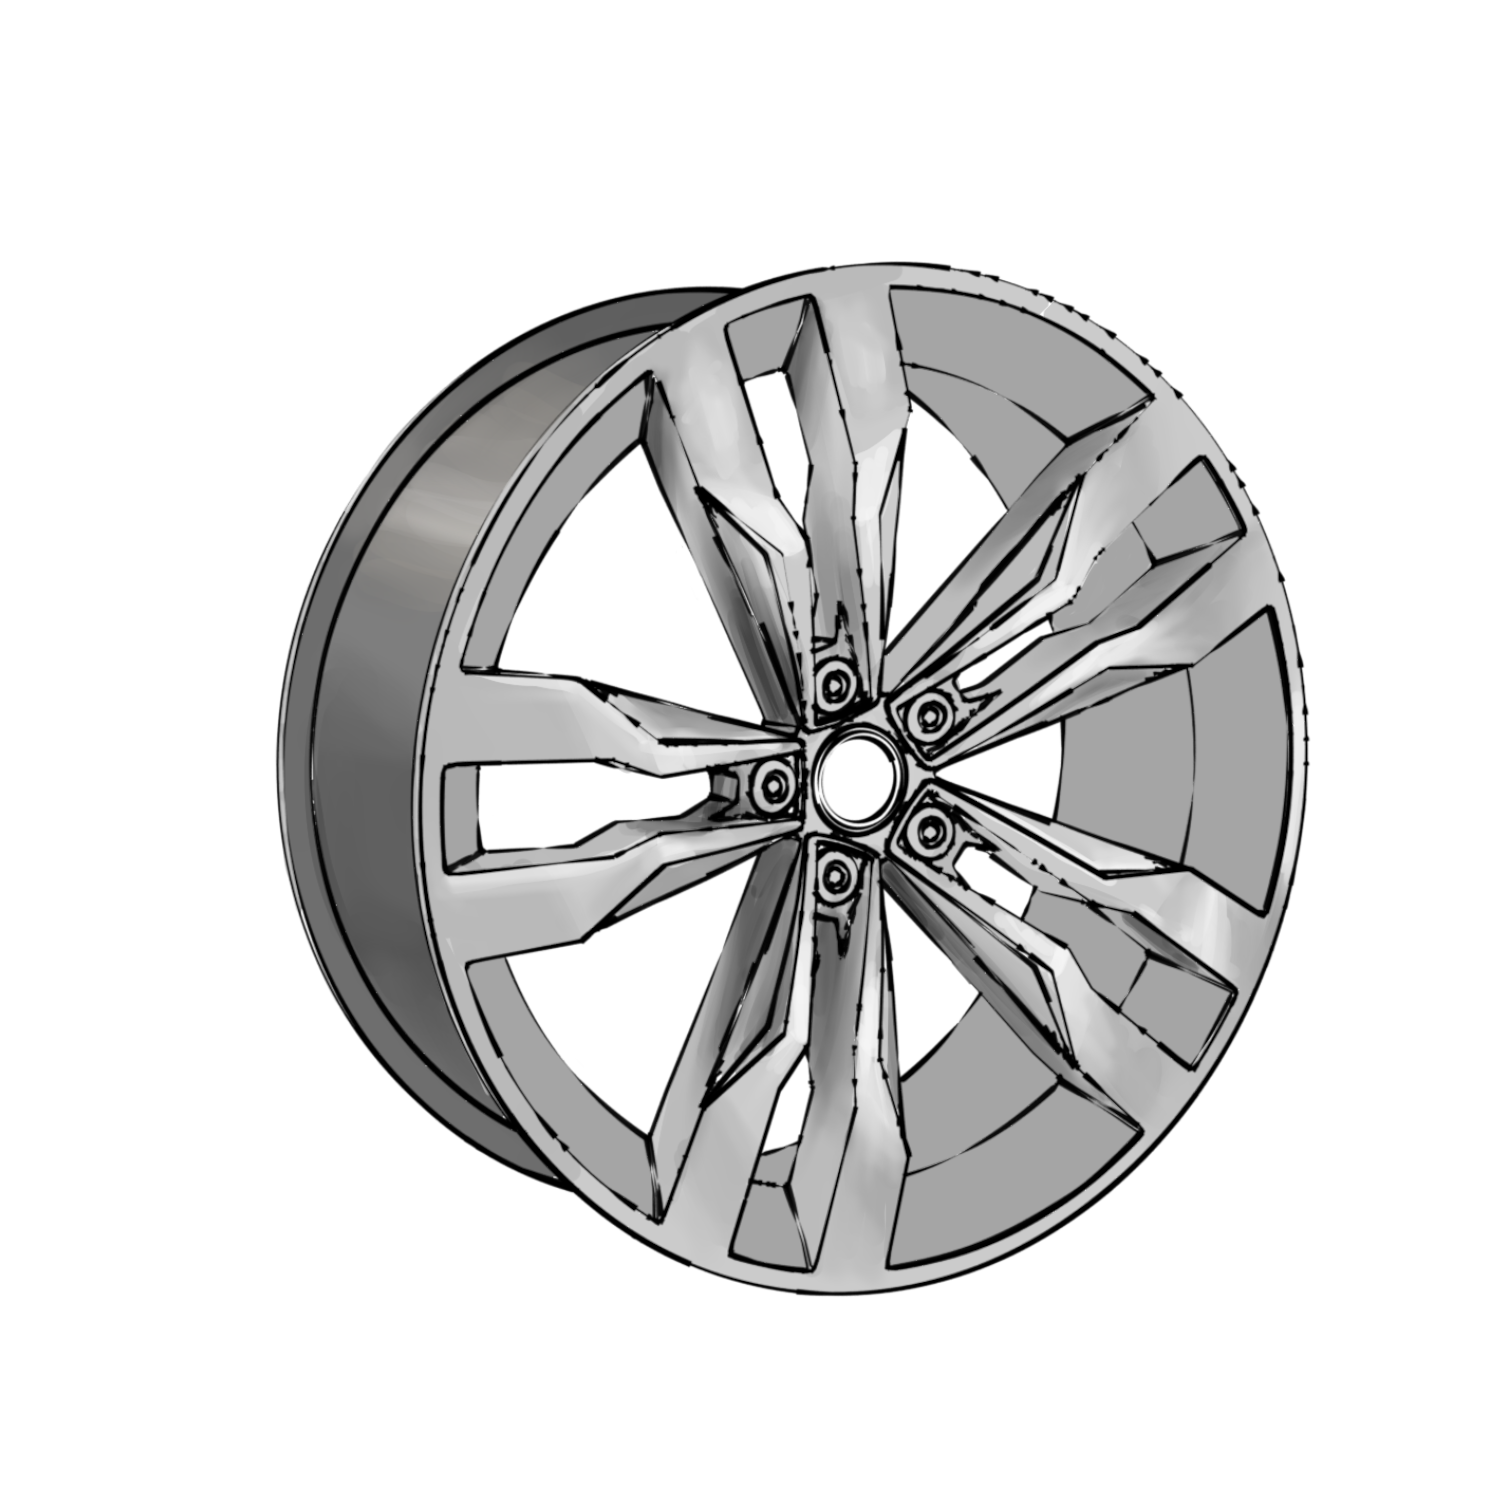  Product image 1 of the product “R8 Basic Rim ”